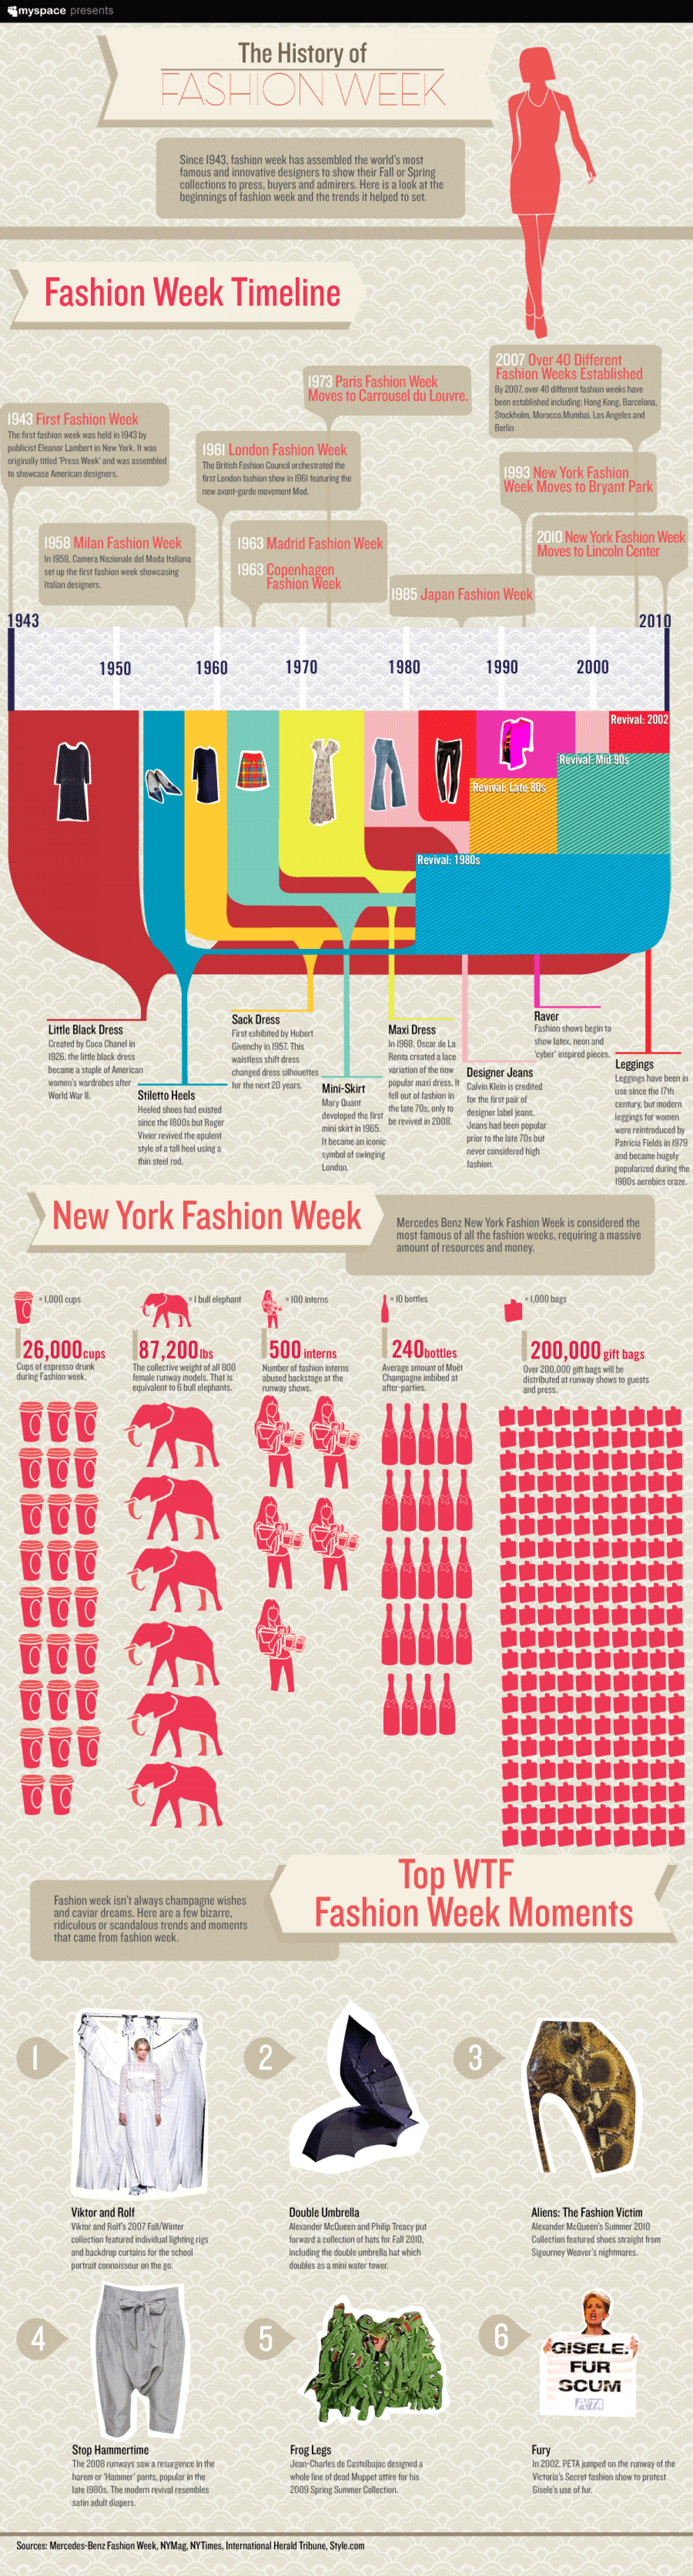 The History of Fashion Week  Infographic